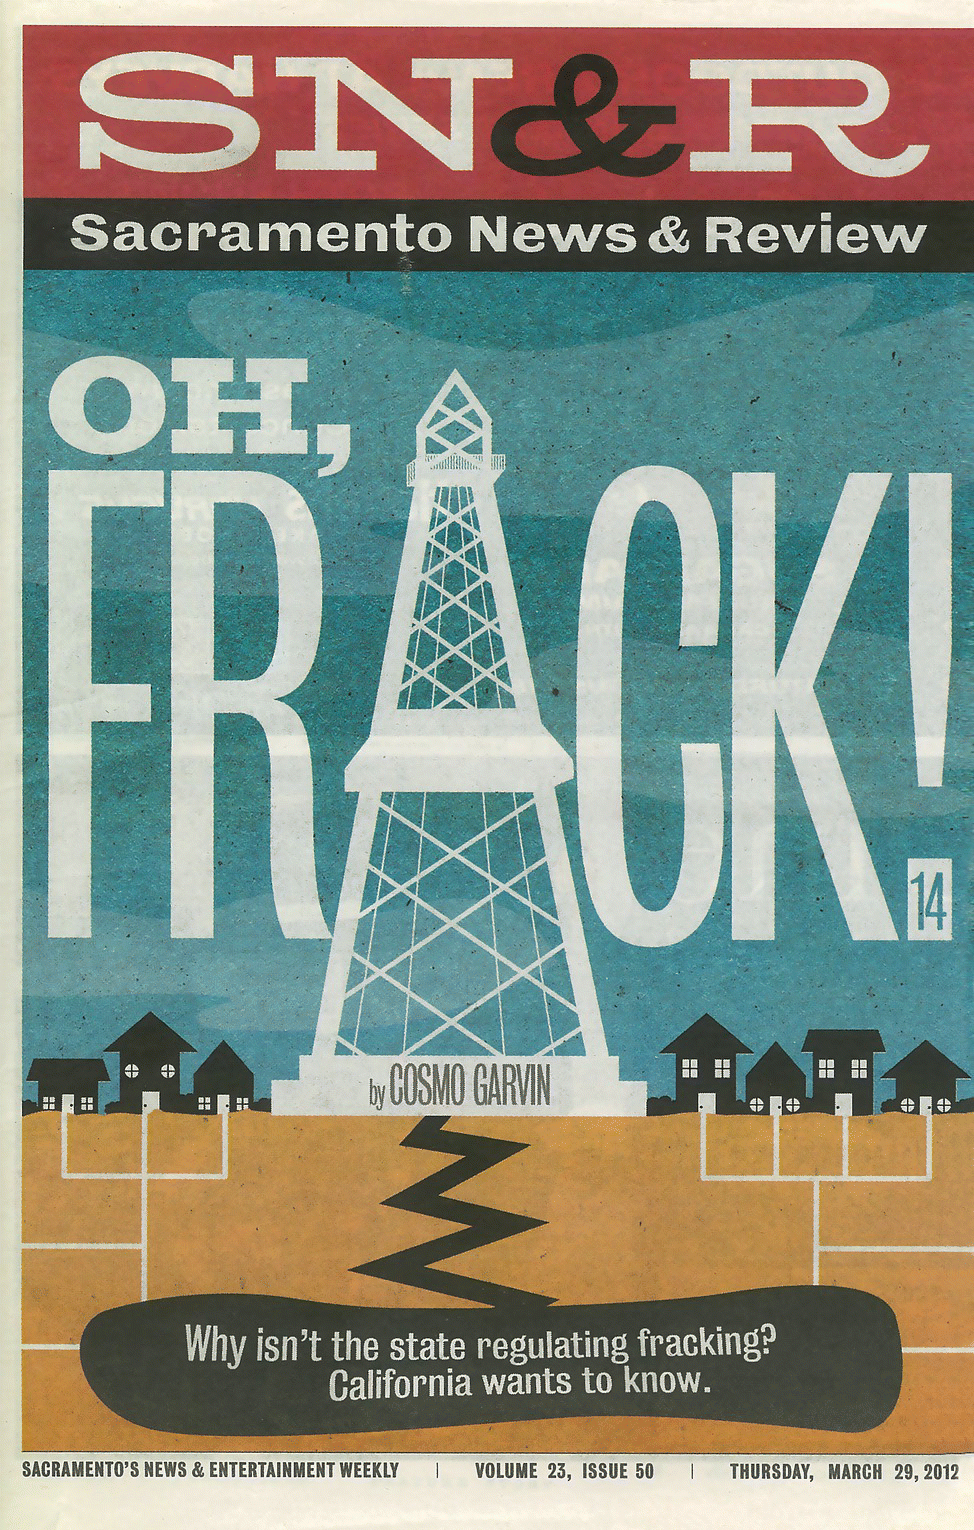 Cover page of a newspaper, Sacramento News & Review, with texts labeled “OH, FRACK!.” Below is another texts labeled “Why isn’t the state regulating fracking? California wants to know.”